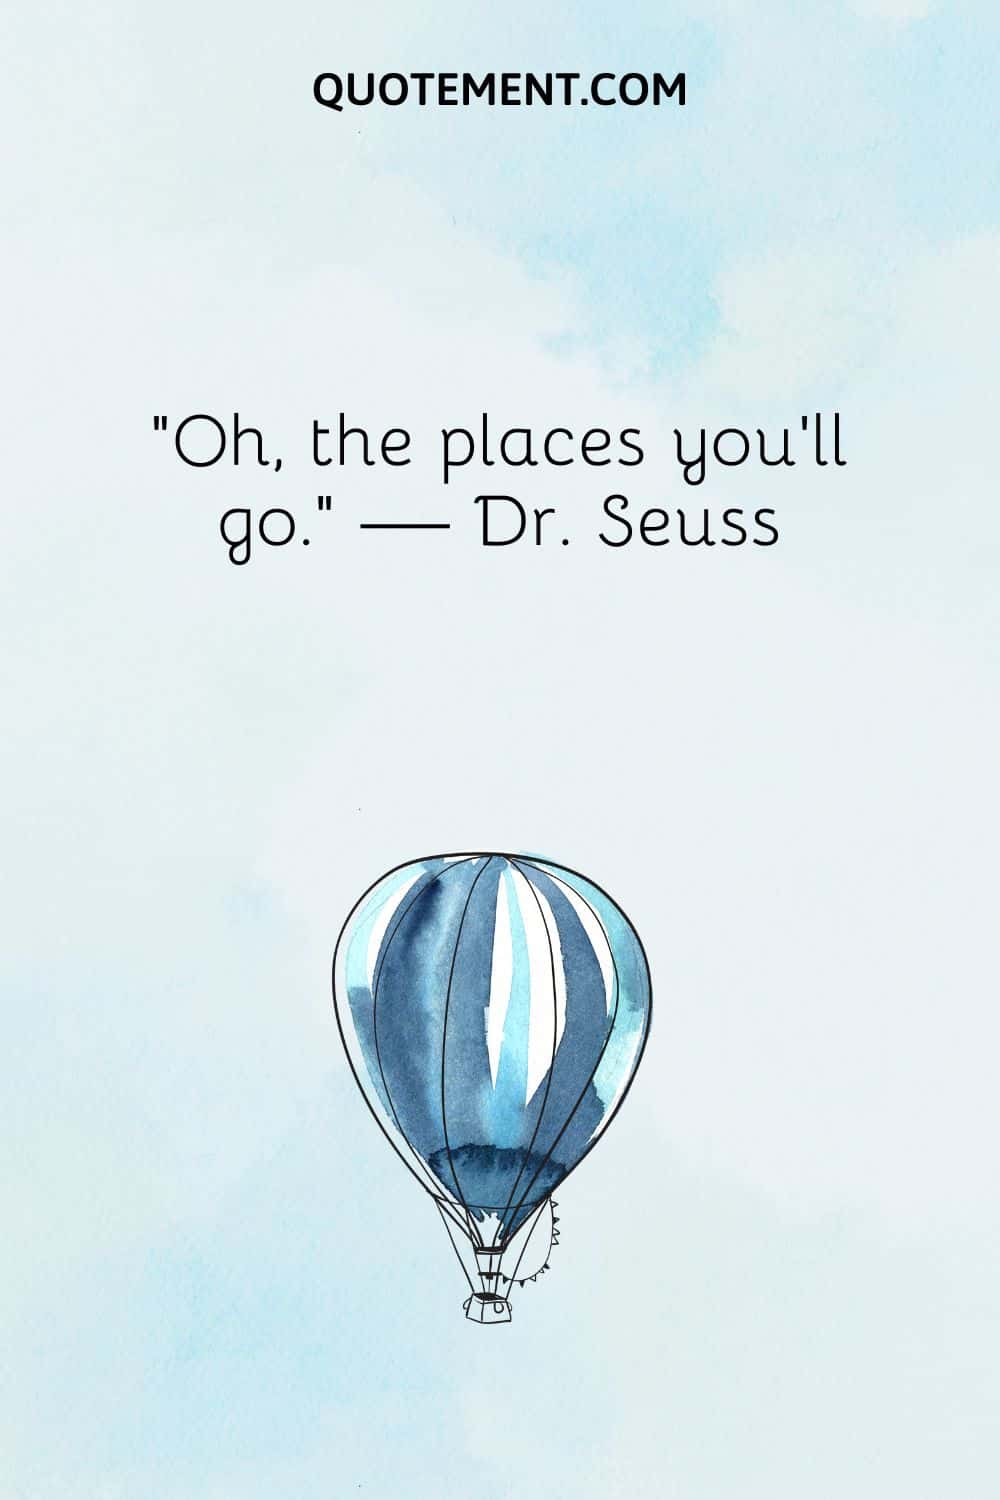 Oh, the places you’ll go